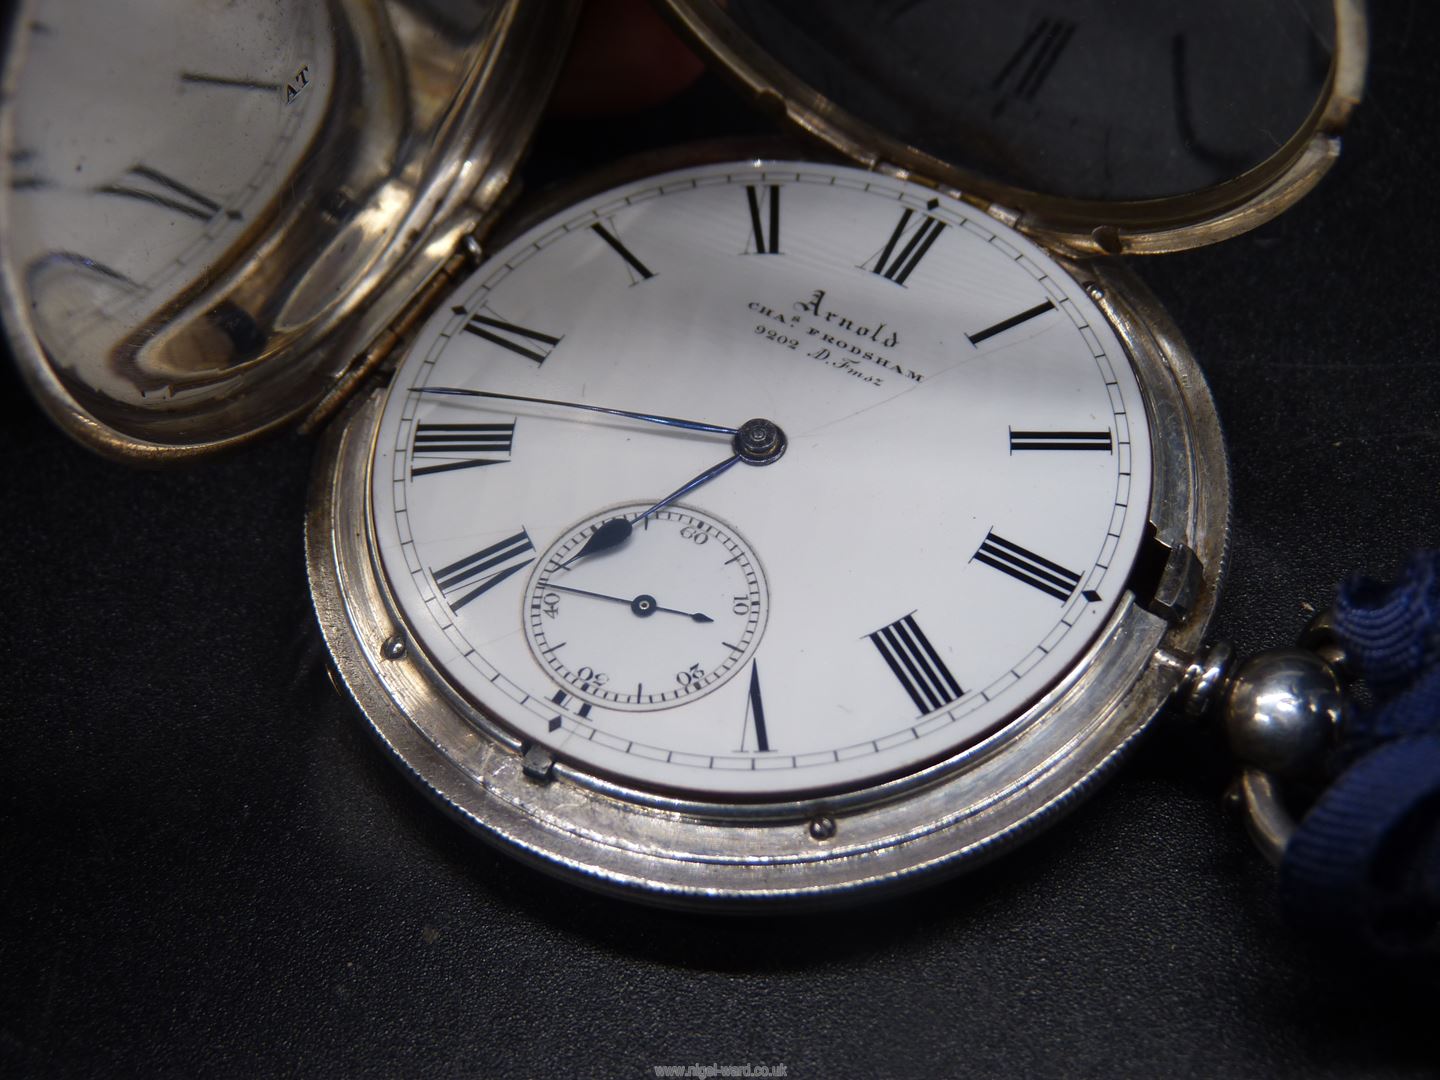 A silver cased key wound Pocket Watch, the quality fusee movement No.